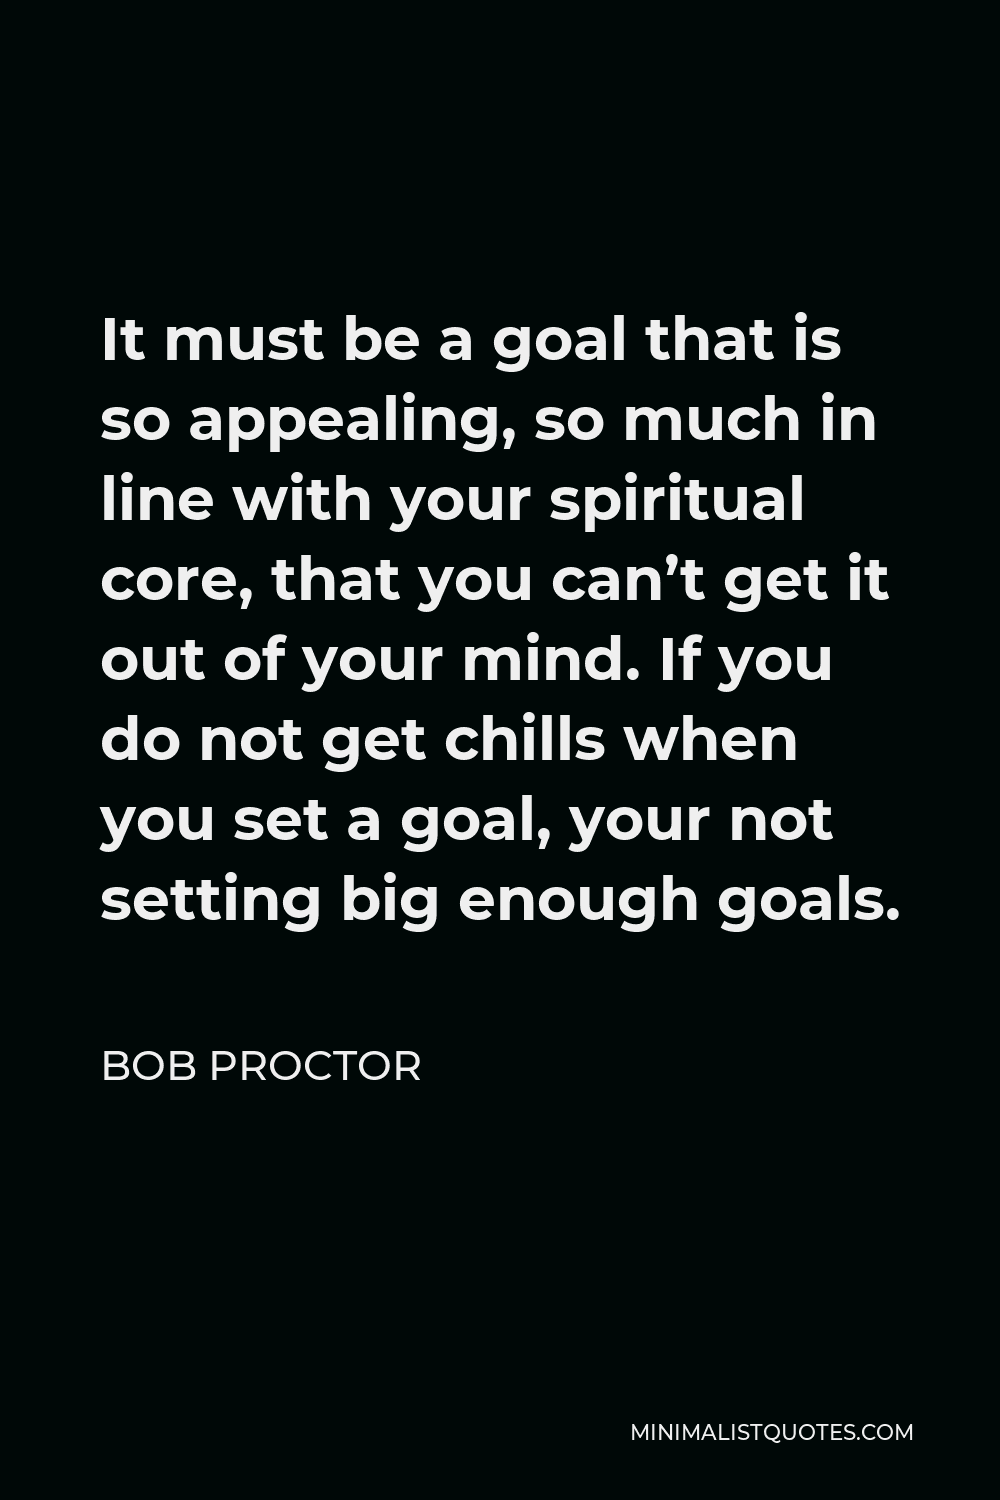 Bob Proctor Quote - It must be a goal that is so appealing, so much in line with your spiritual core, that you can’t get it out of your mind. If you do not get chills when you set a goal, your not setting big enough goals.